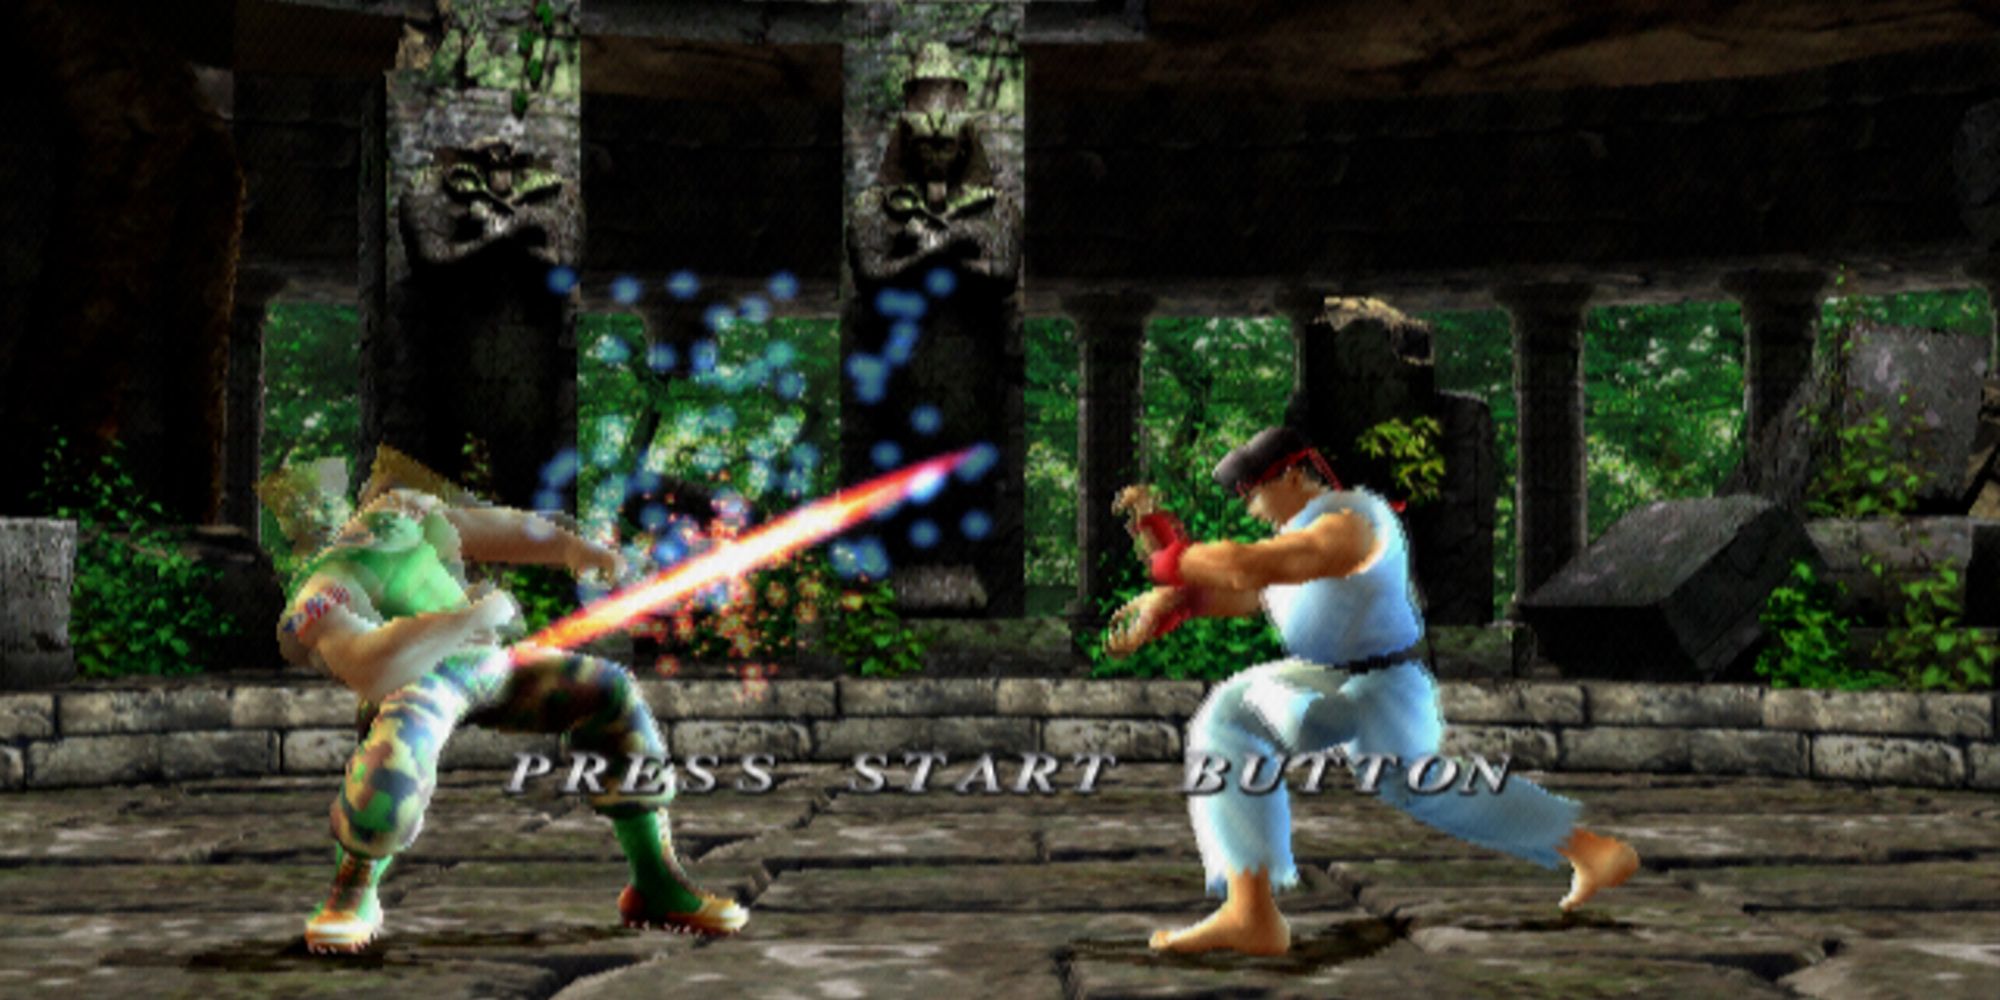 Ryu hurls a Hadoken at Guile during a battle inside stone ruins in Street Fighter EX3.